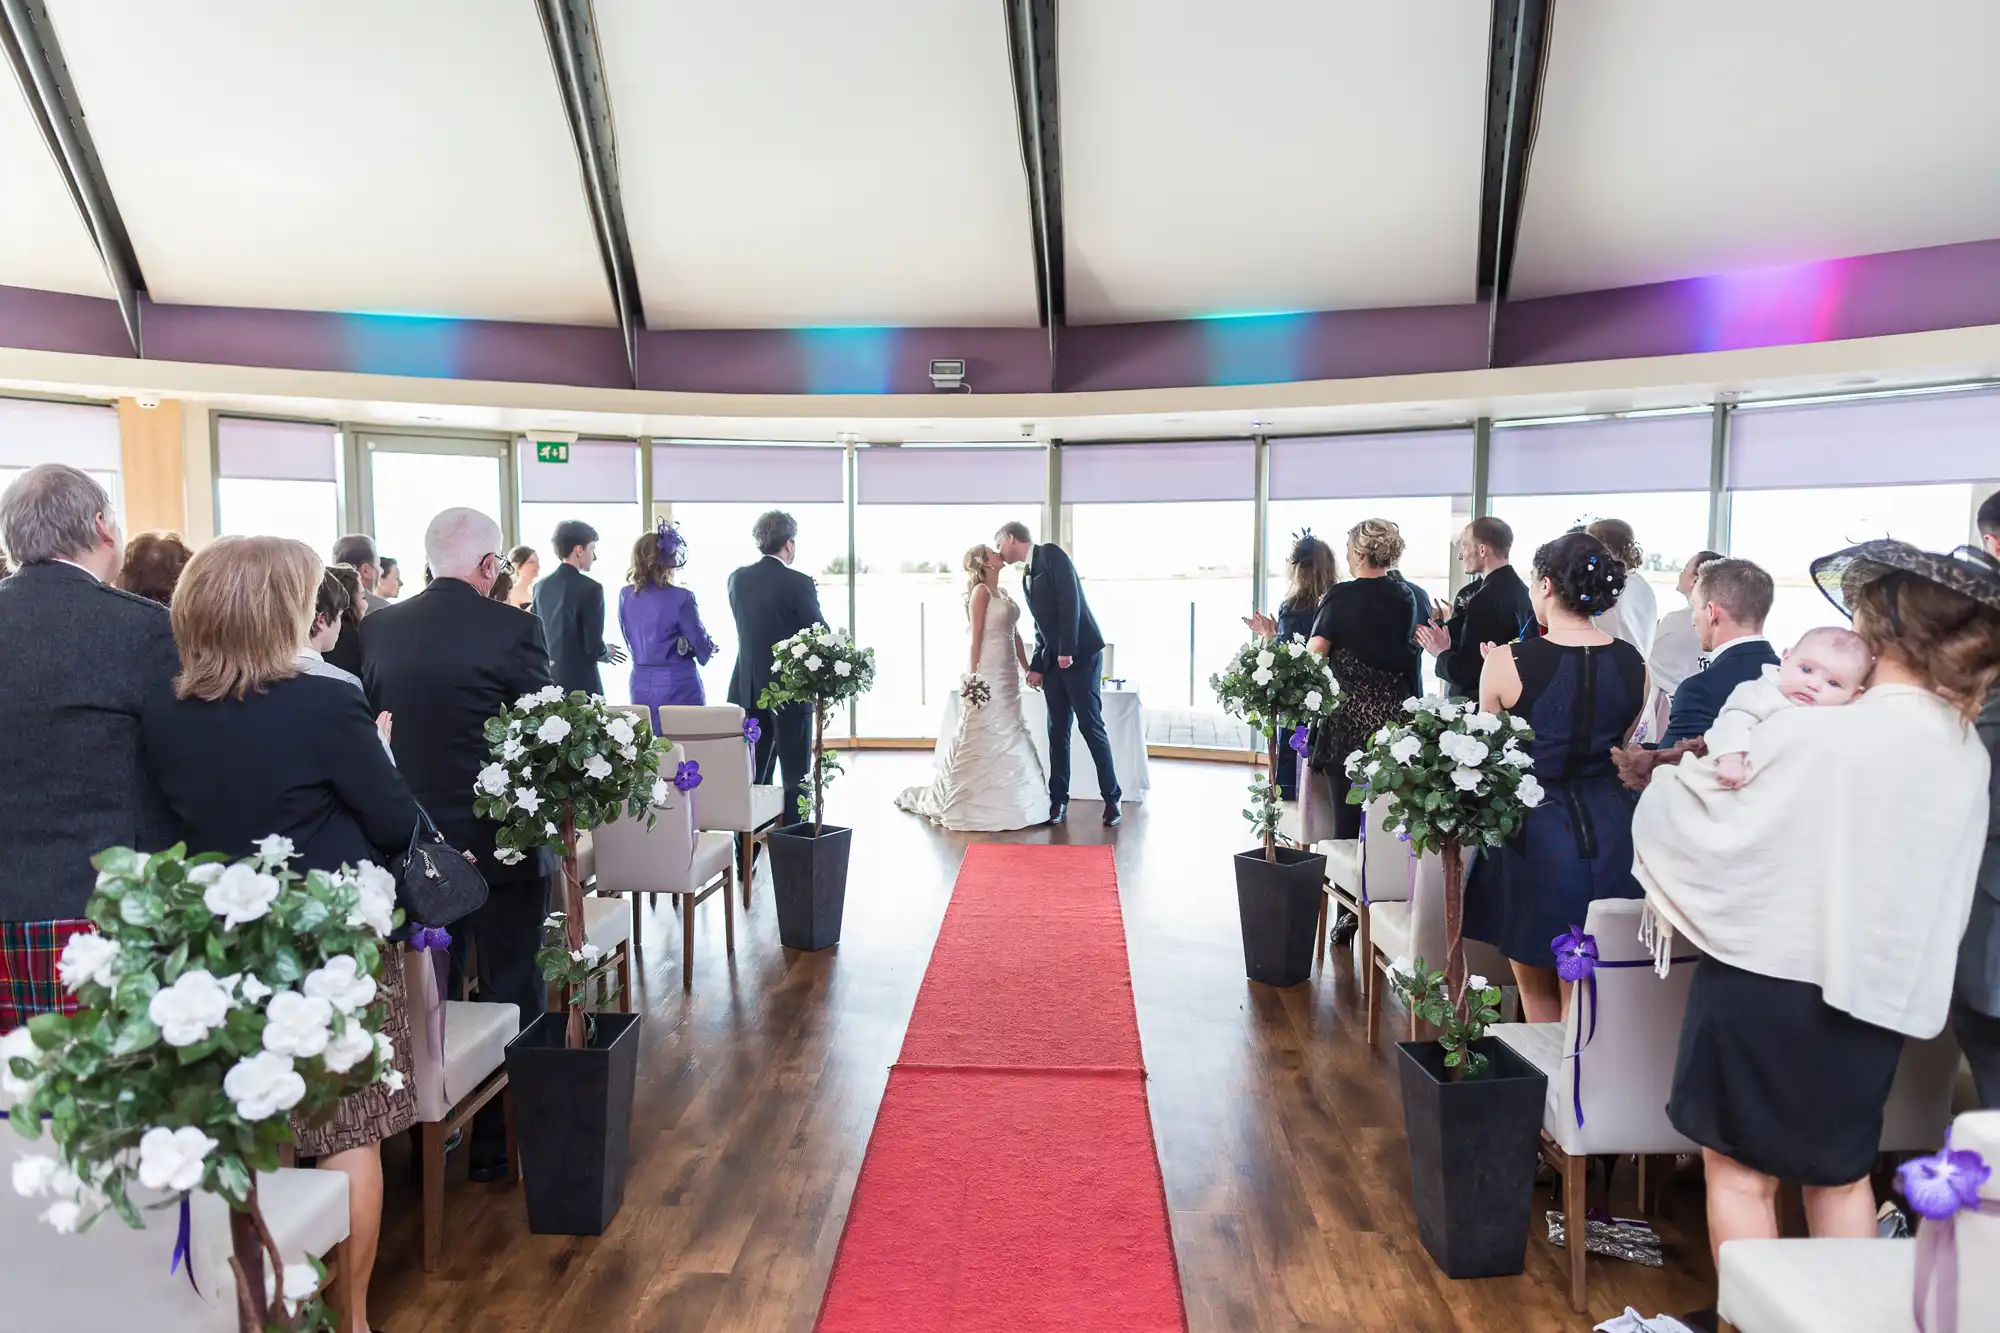 Wedding ceremony in a tent with guests facing a couple exchanging vows at the end of a red carpet, surrounded by floral decorations.